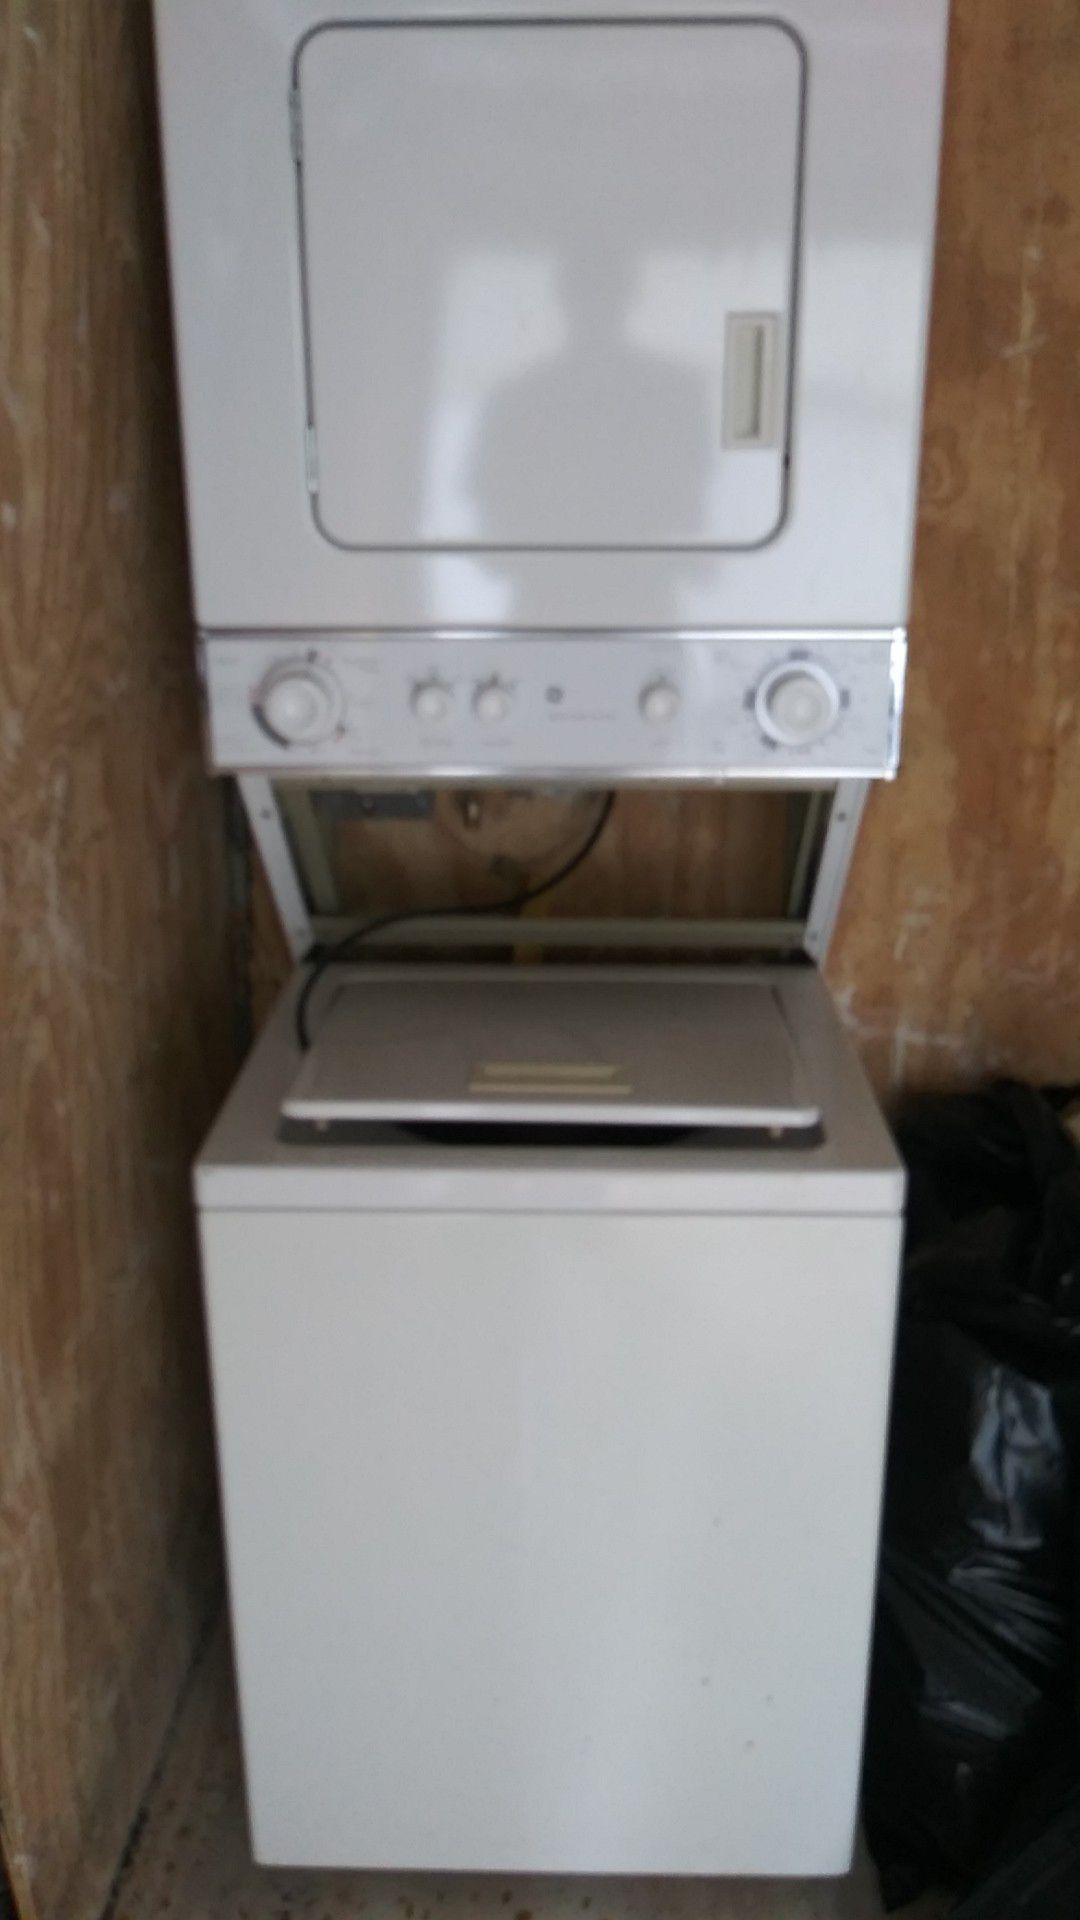 Spacemaker laundry and washing dryer